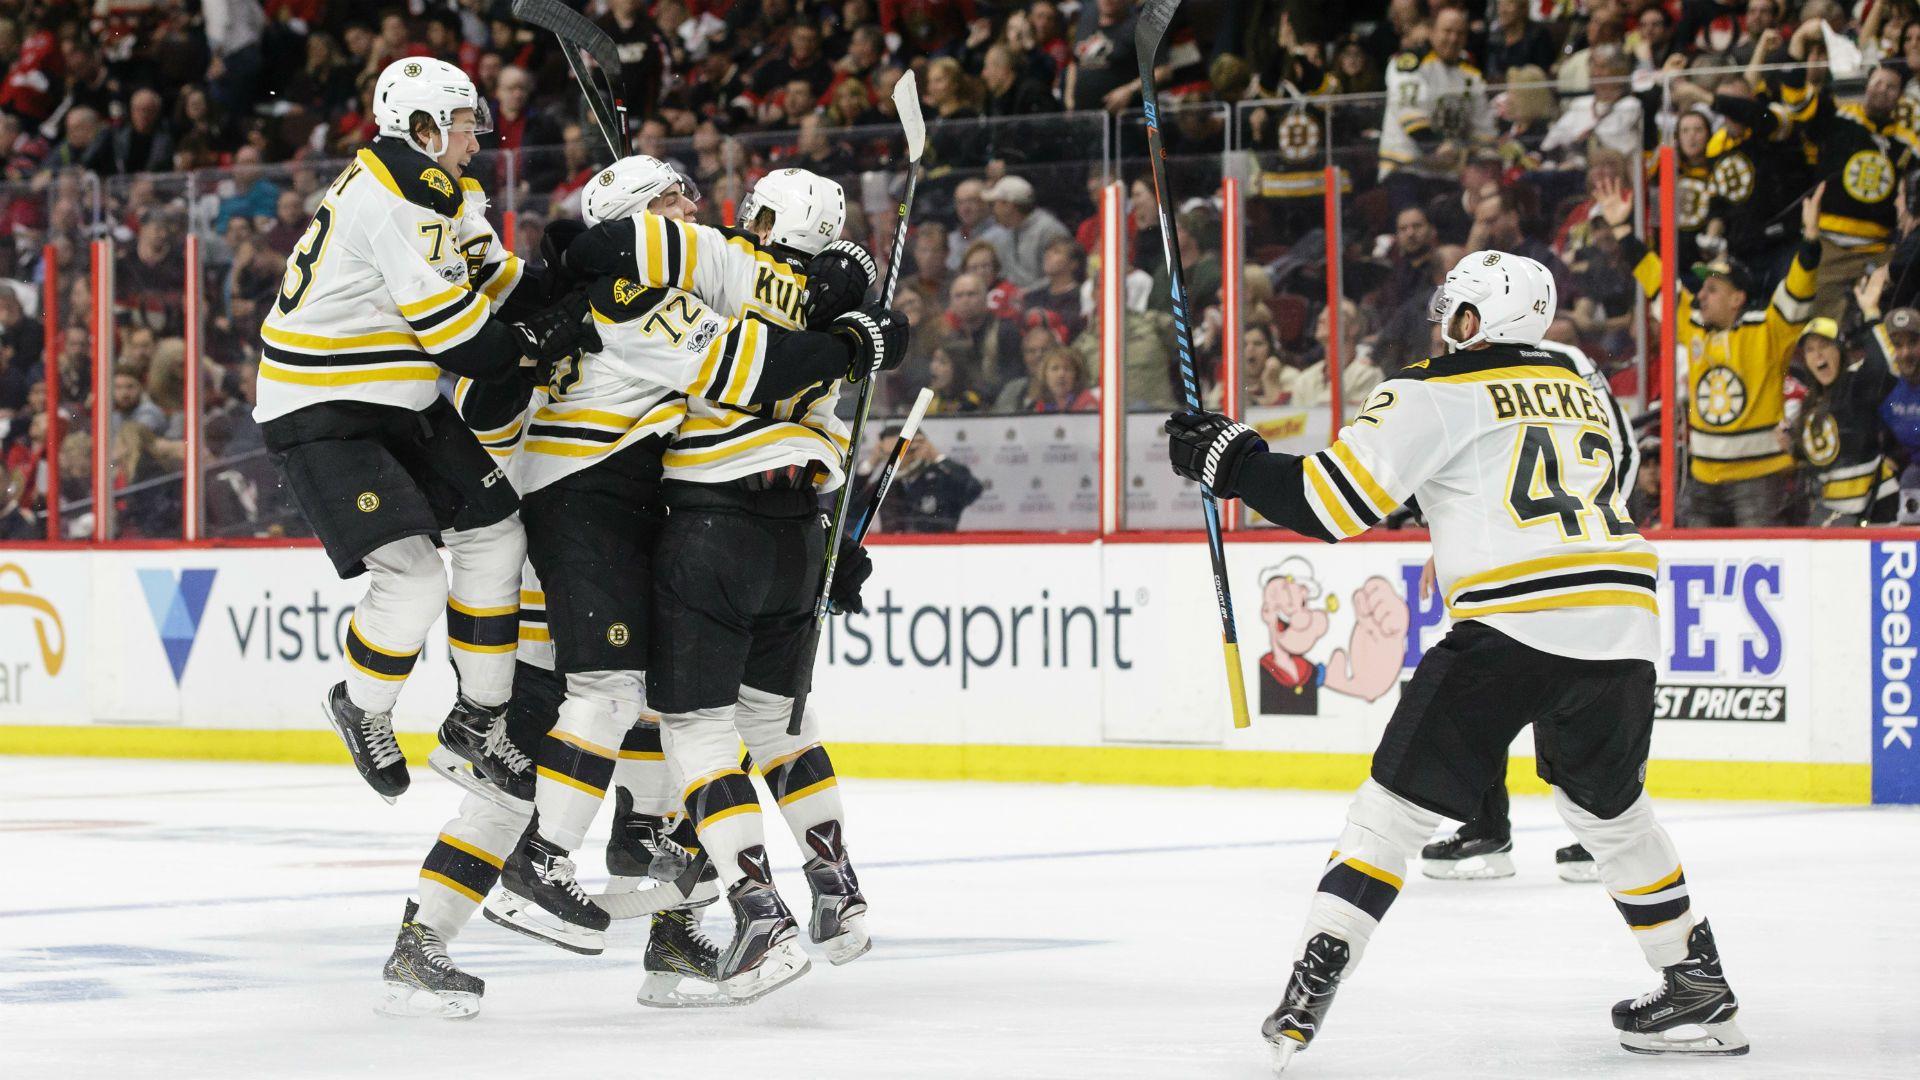 NHL Playoffs: Bruins Force Game 6 After Double OT Win Over